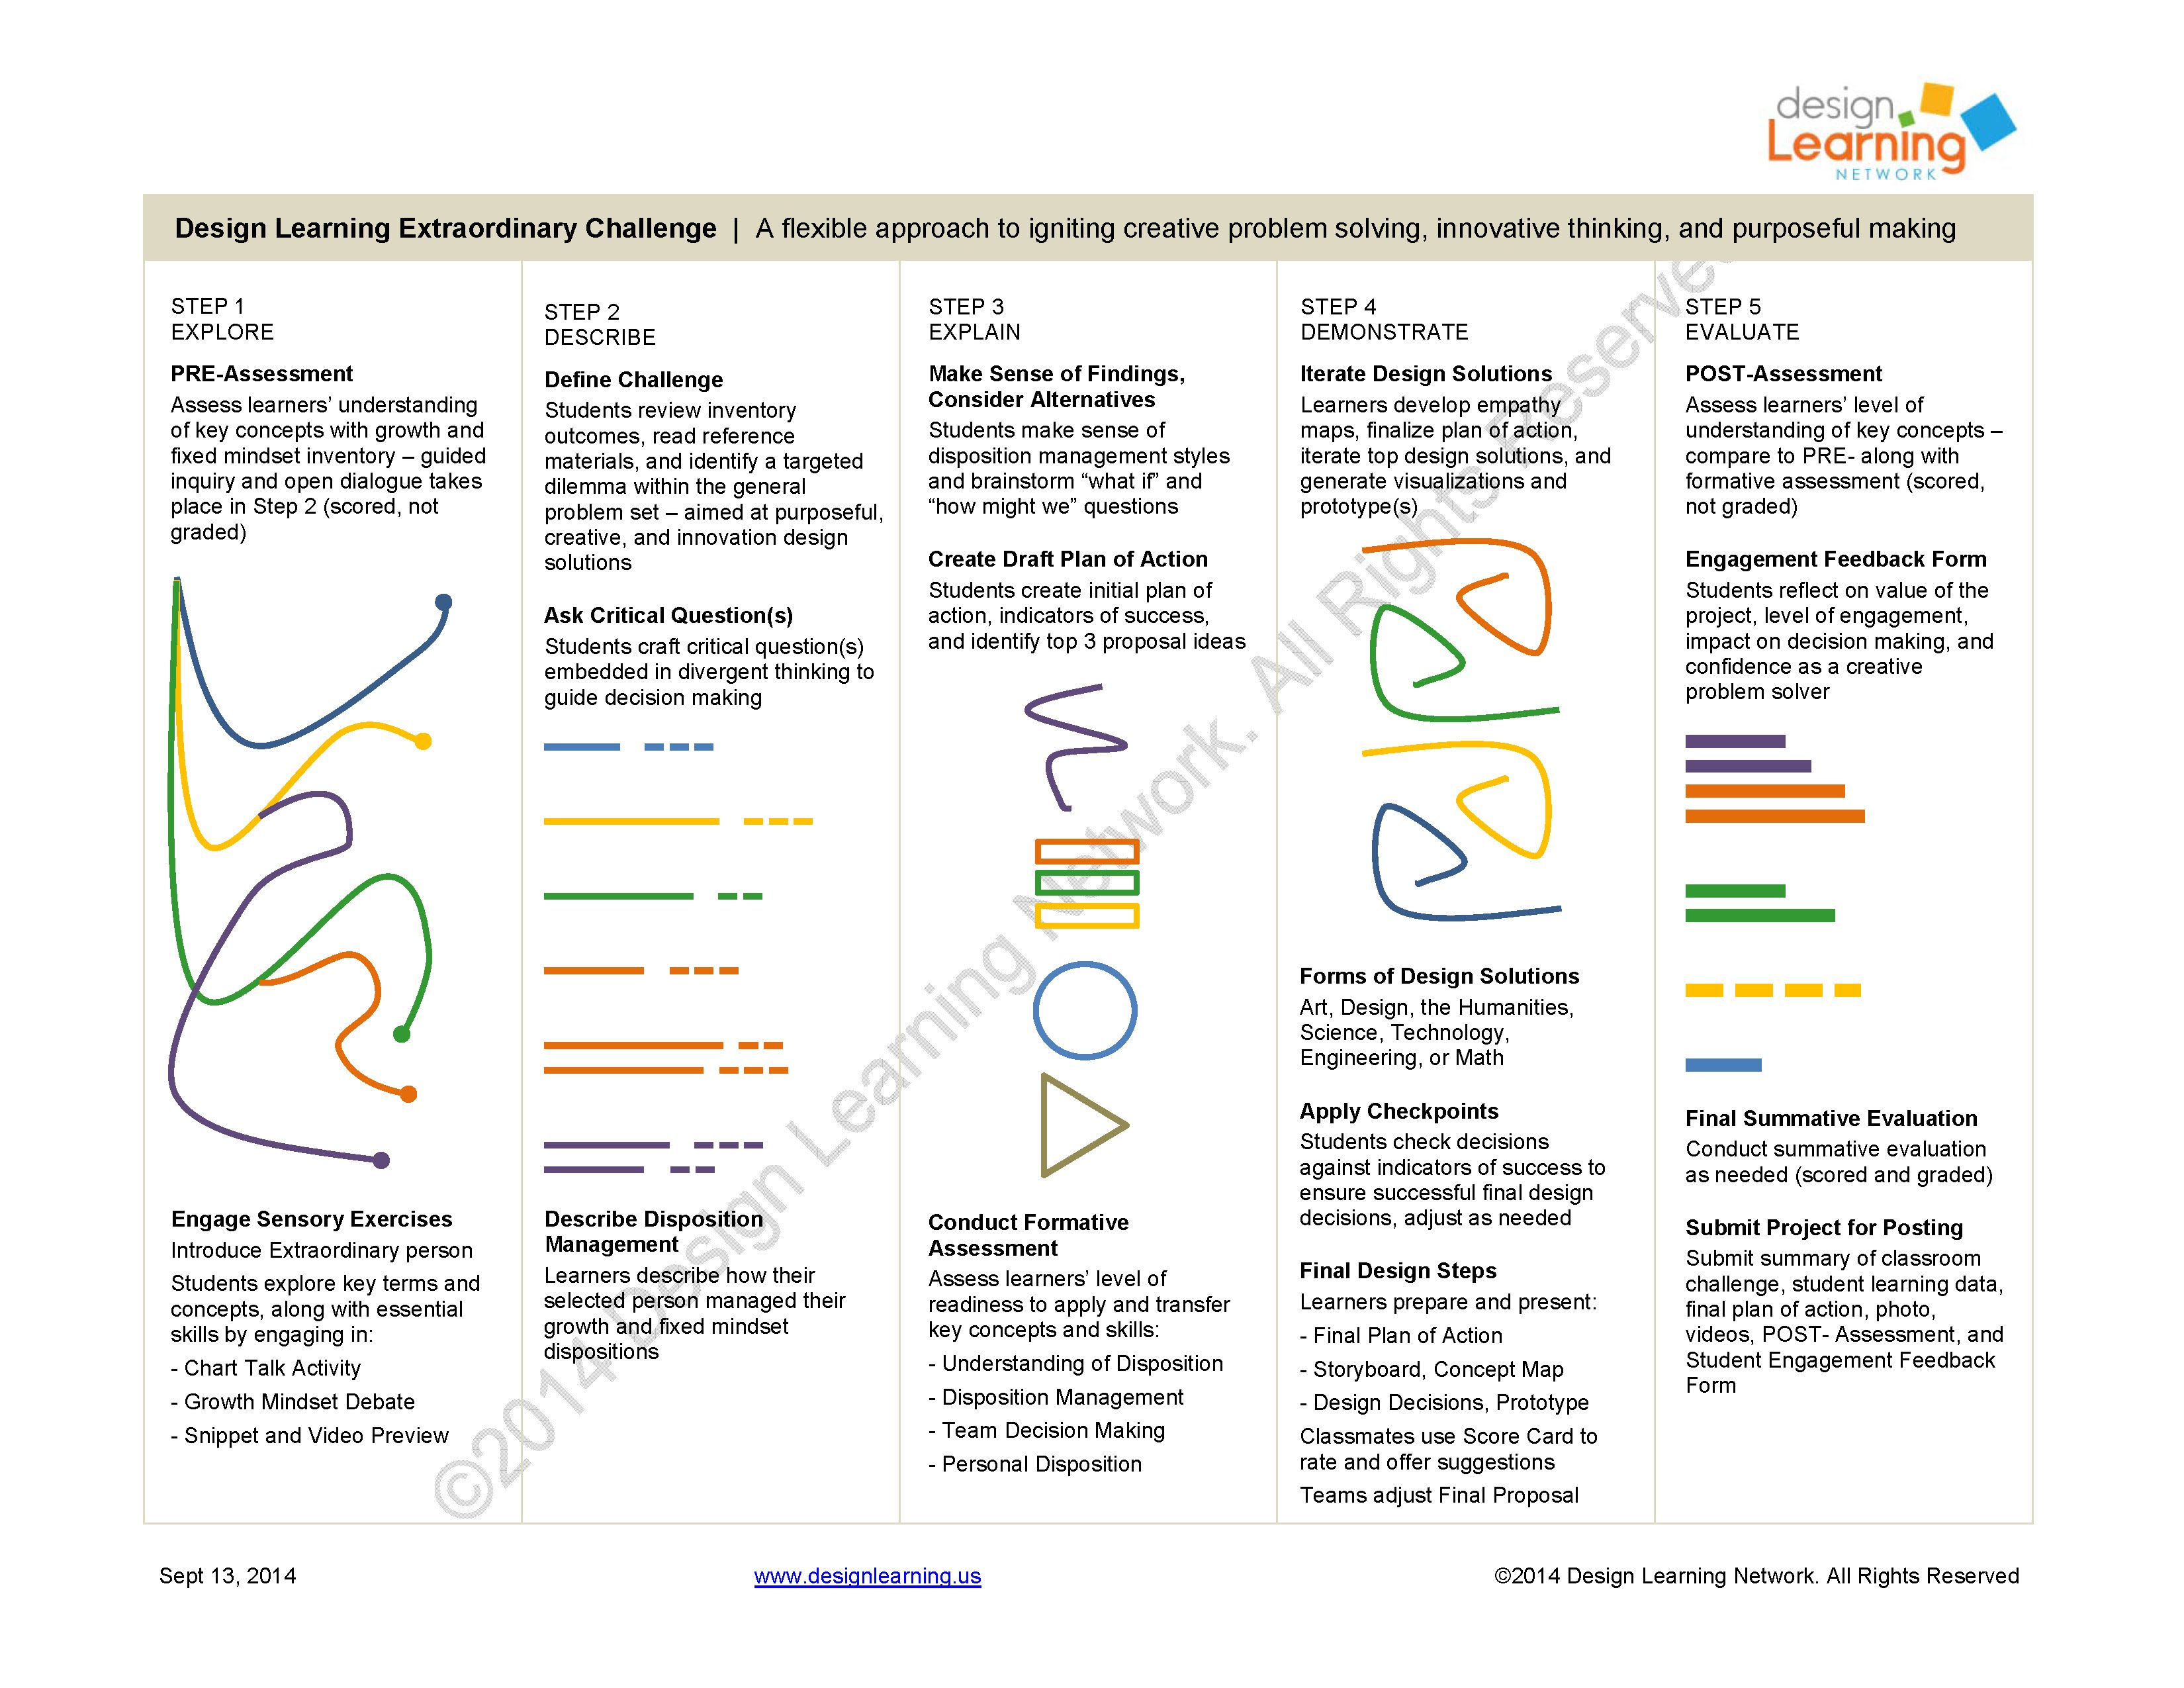 The Design Learning Process - Design Learning Network